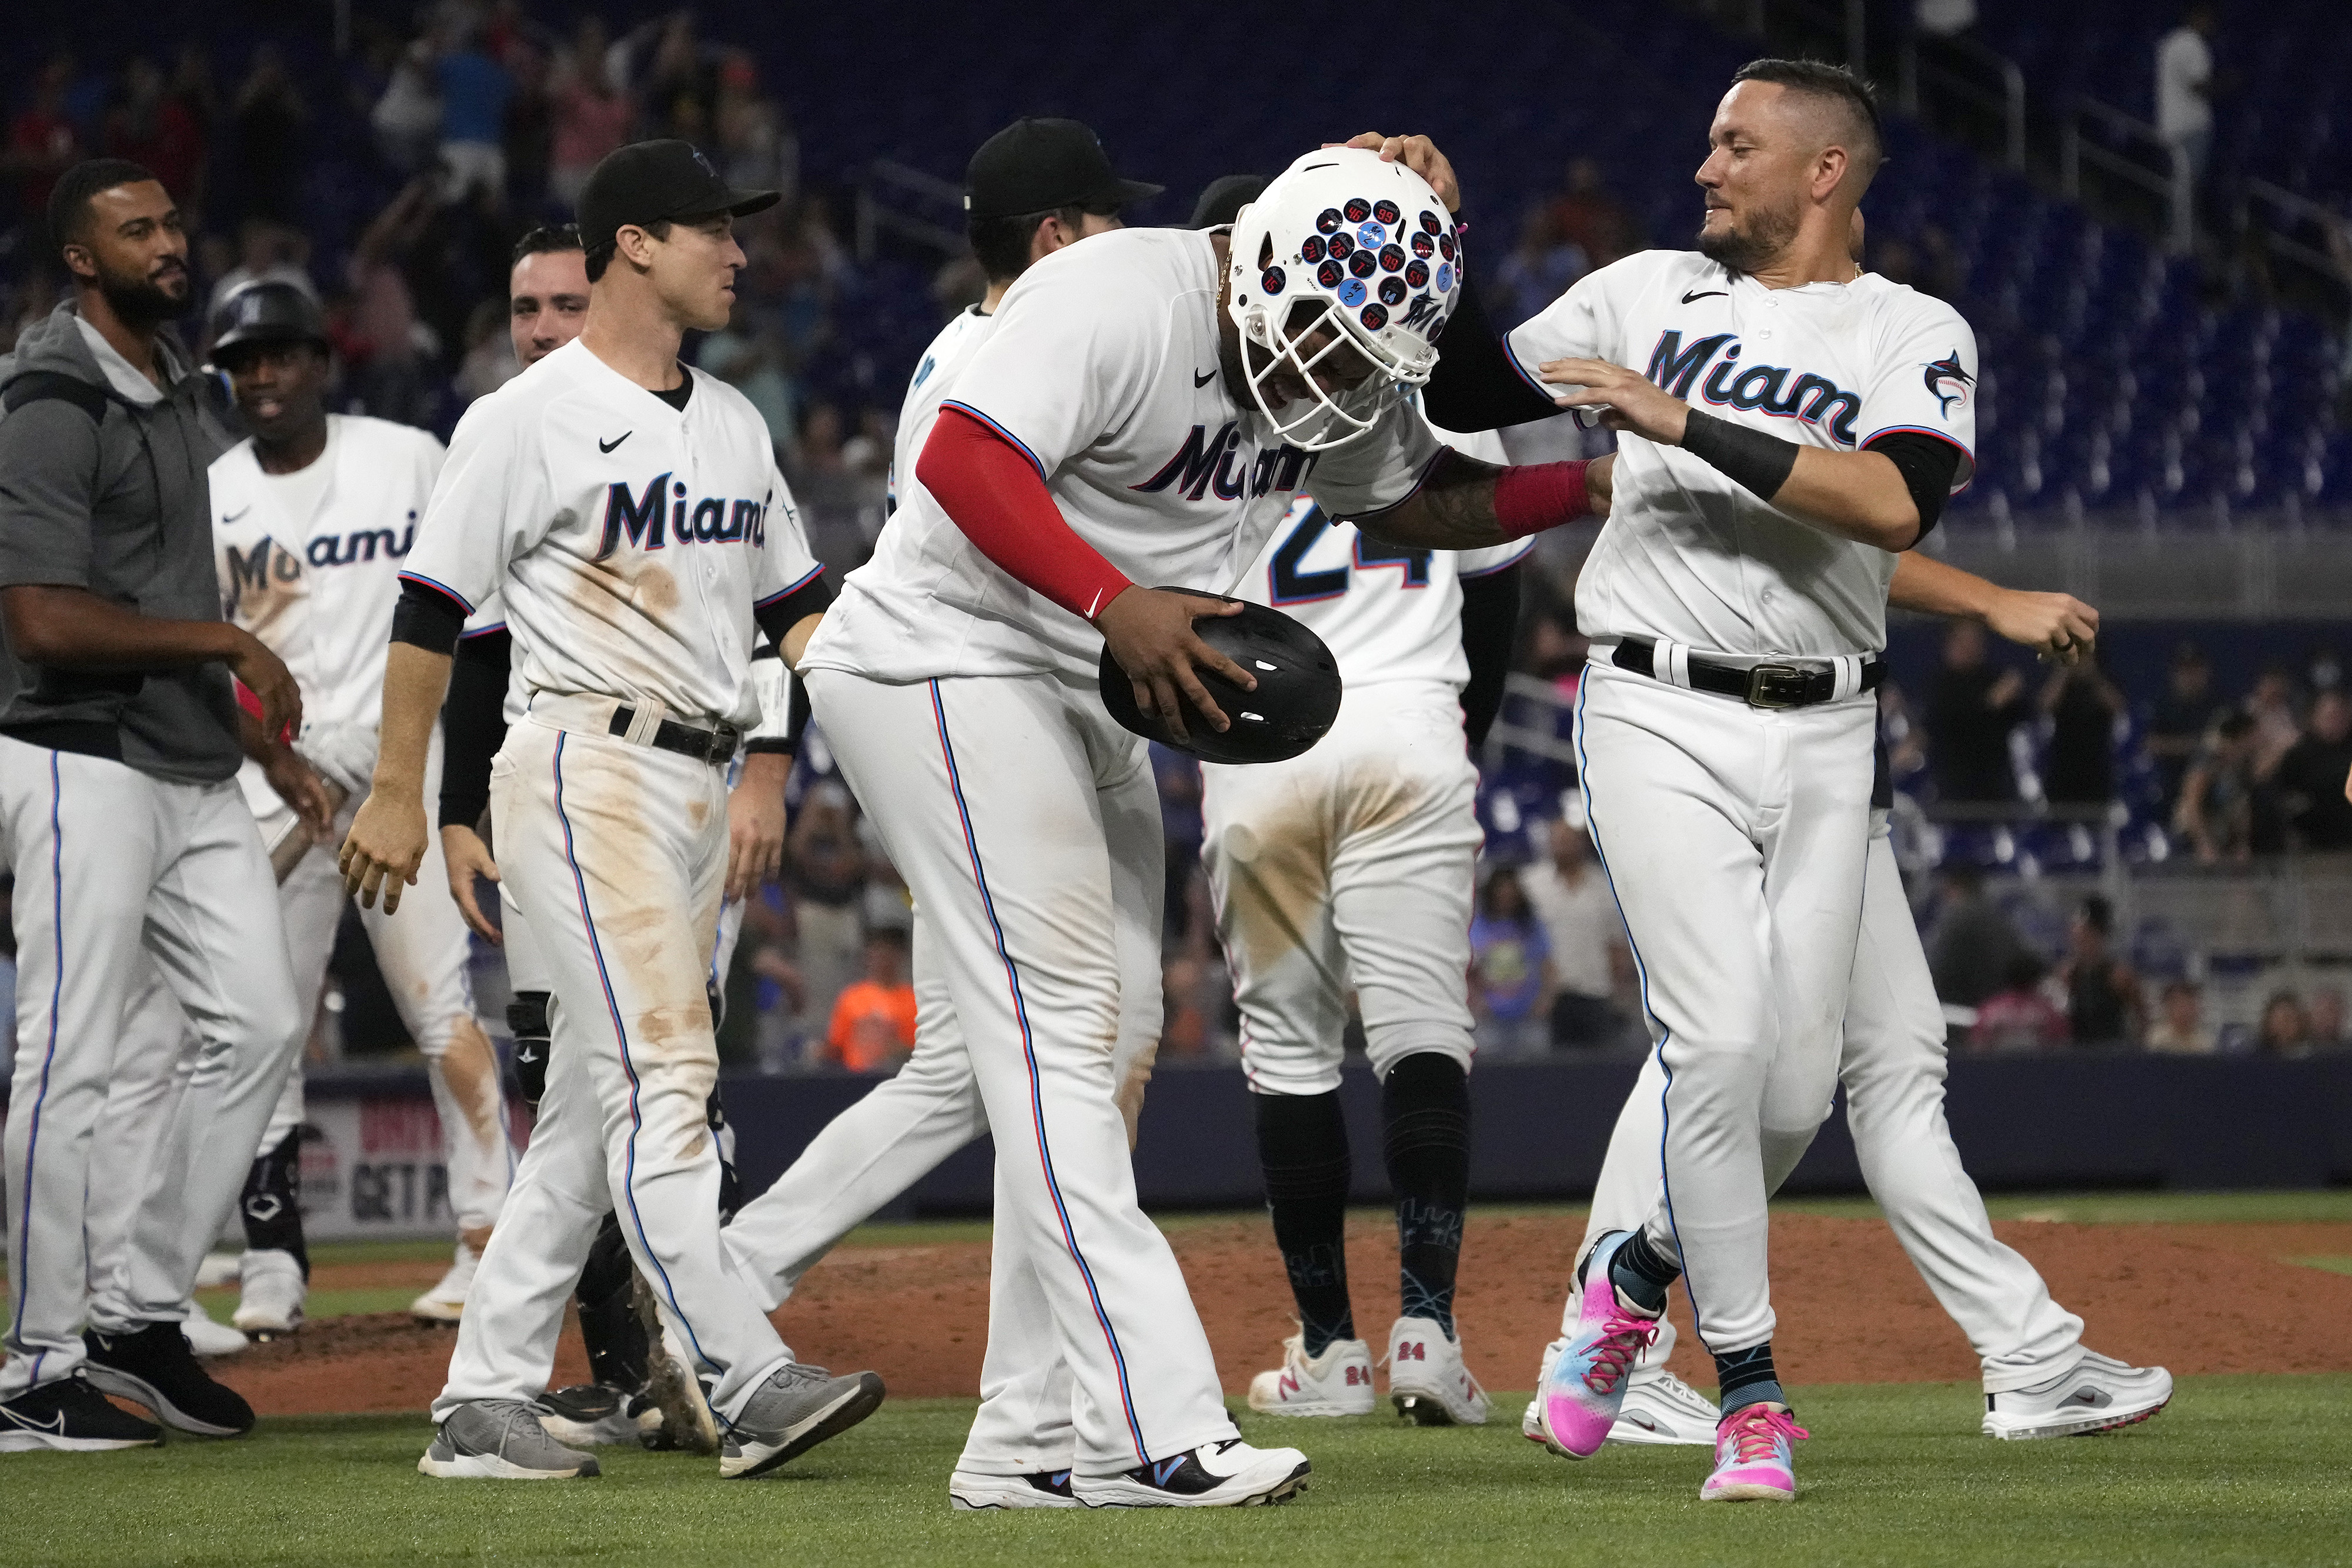 Miami Marlins teammates celebrate defeating the Pittsburgh Pirates after Miami Marlins first baseman Jesus Aguilar (99) scored the walk off game winning run on a wild pitch by Pittsburgh Pirates relief pitcher David Bednar (not pictured) at loanDepot park.